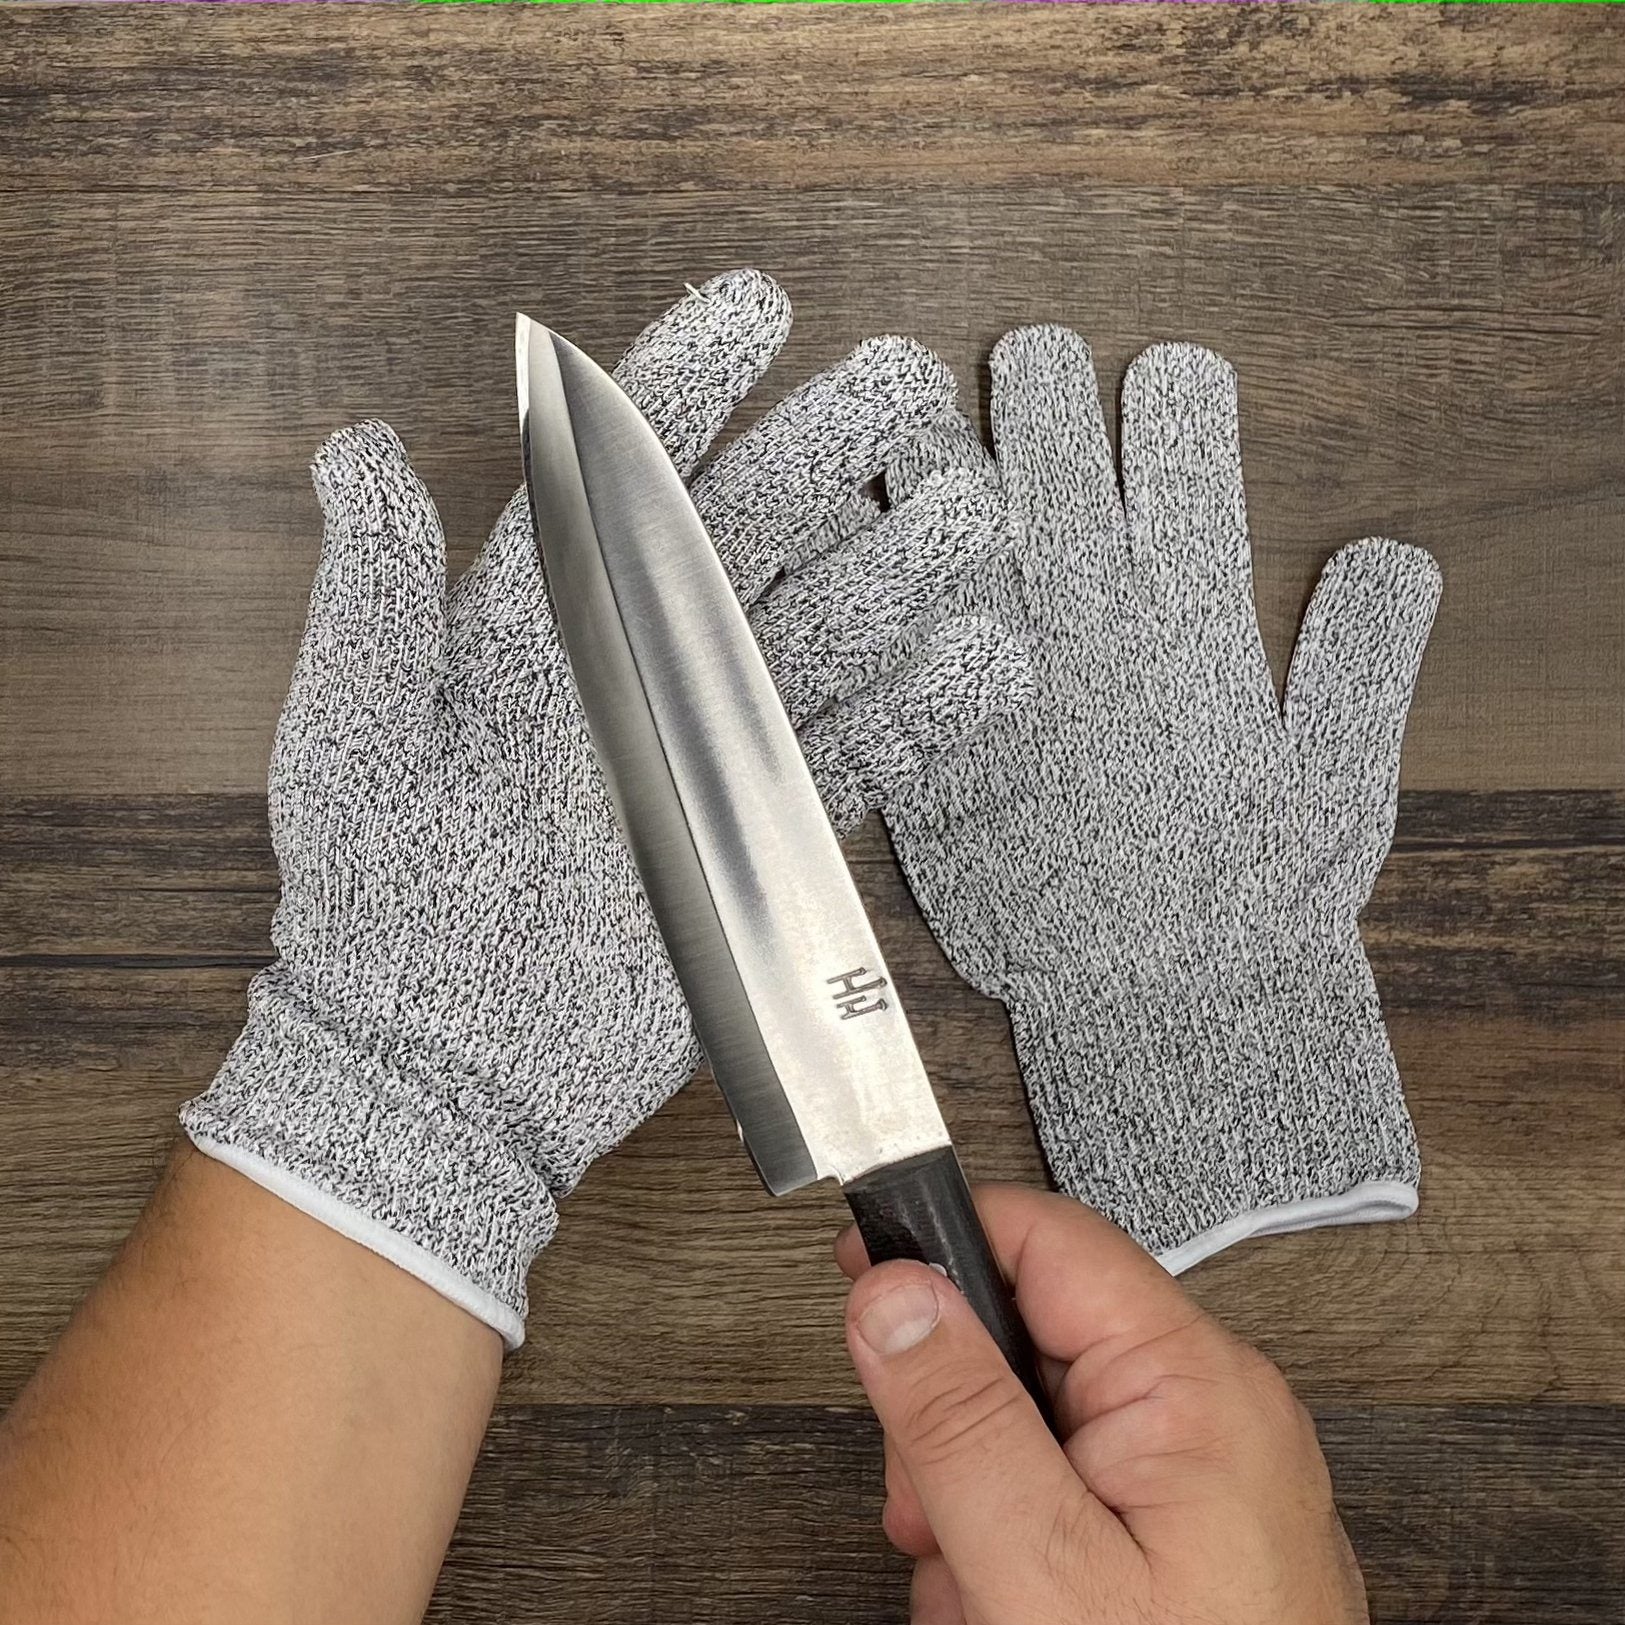 Food Grade Kitchen Cut Resistant Gloves (Pair) for Cutting and